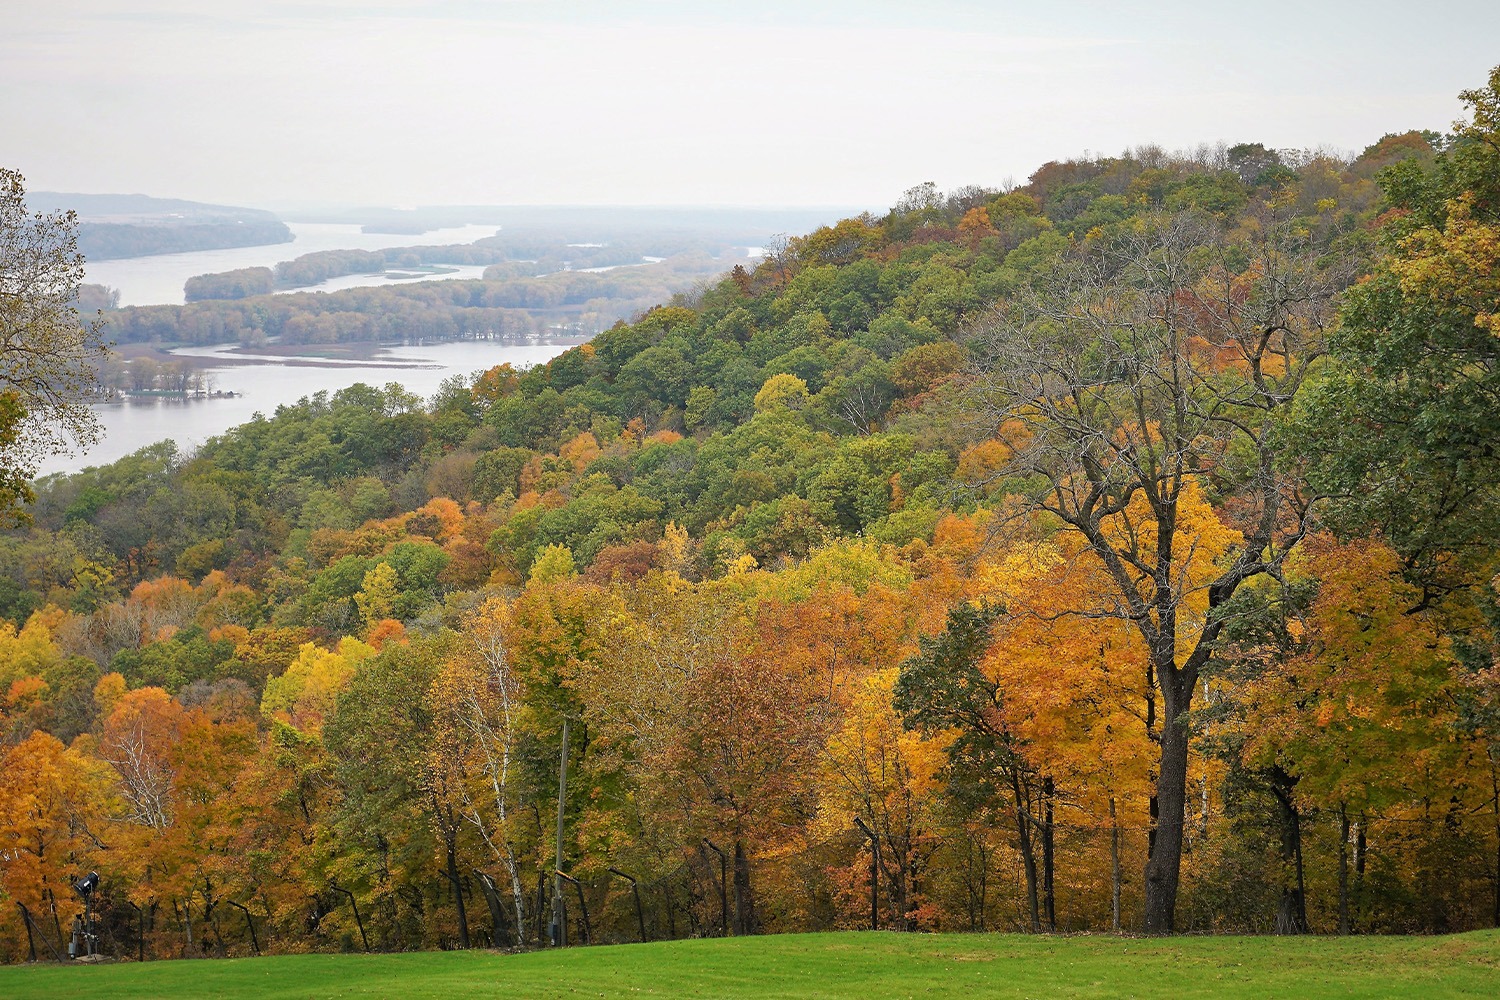 The Top 5 Stays for Midwestern Fall Foliage Viewing 